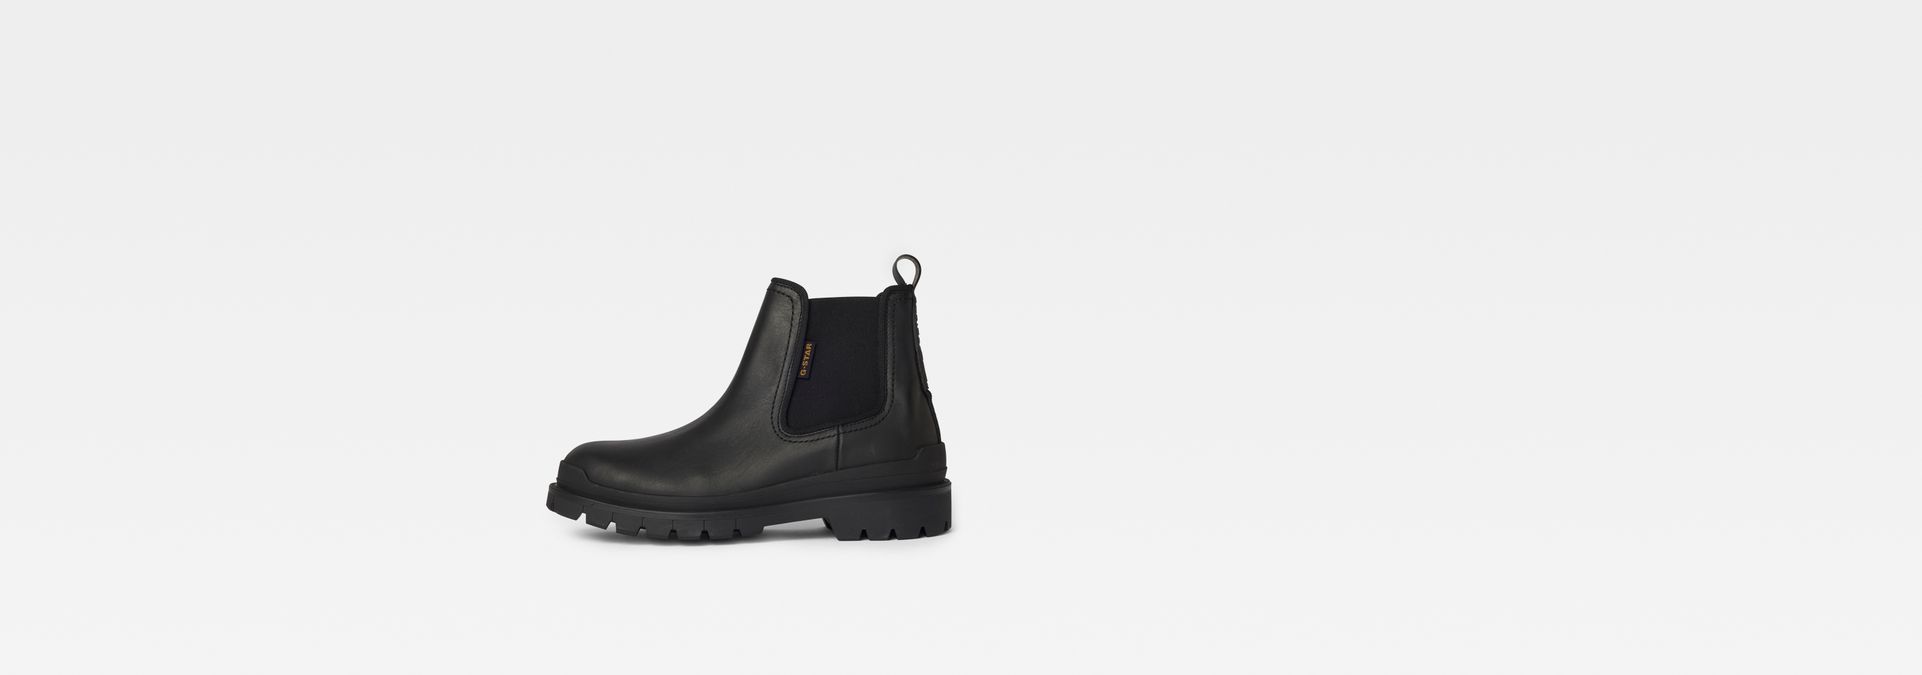 g-star.com | Blake Chelsea Leather Boots